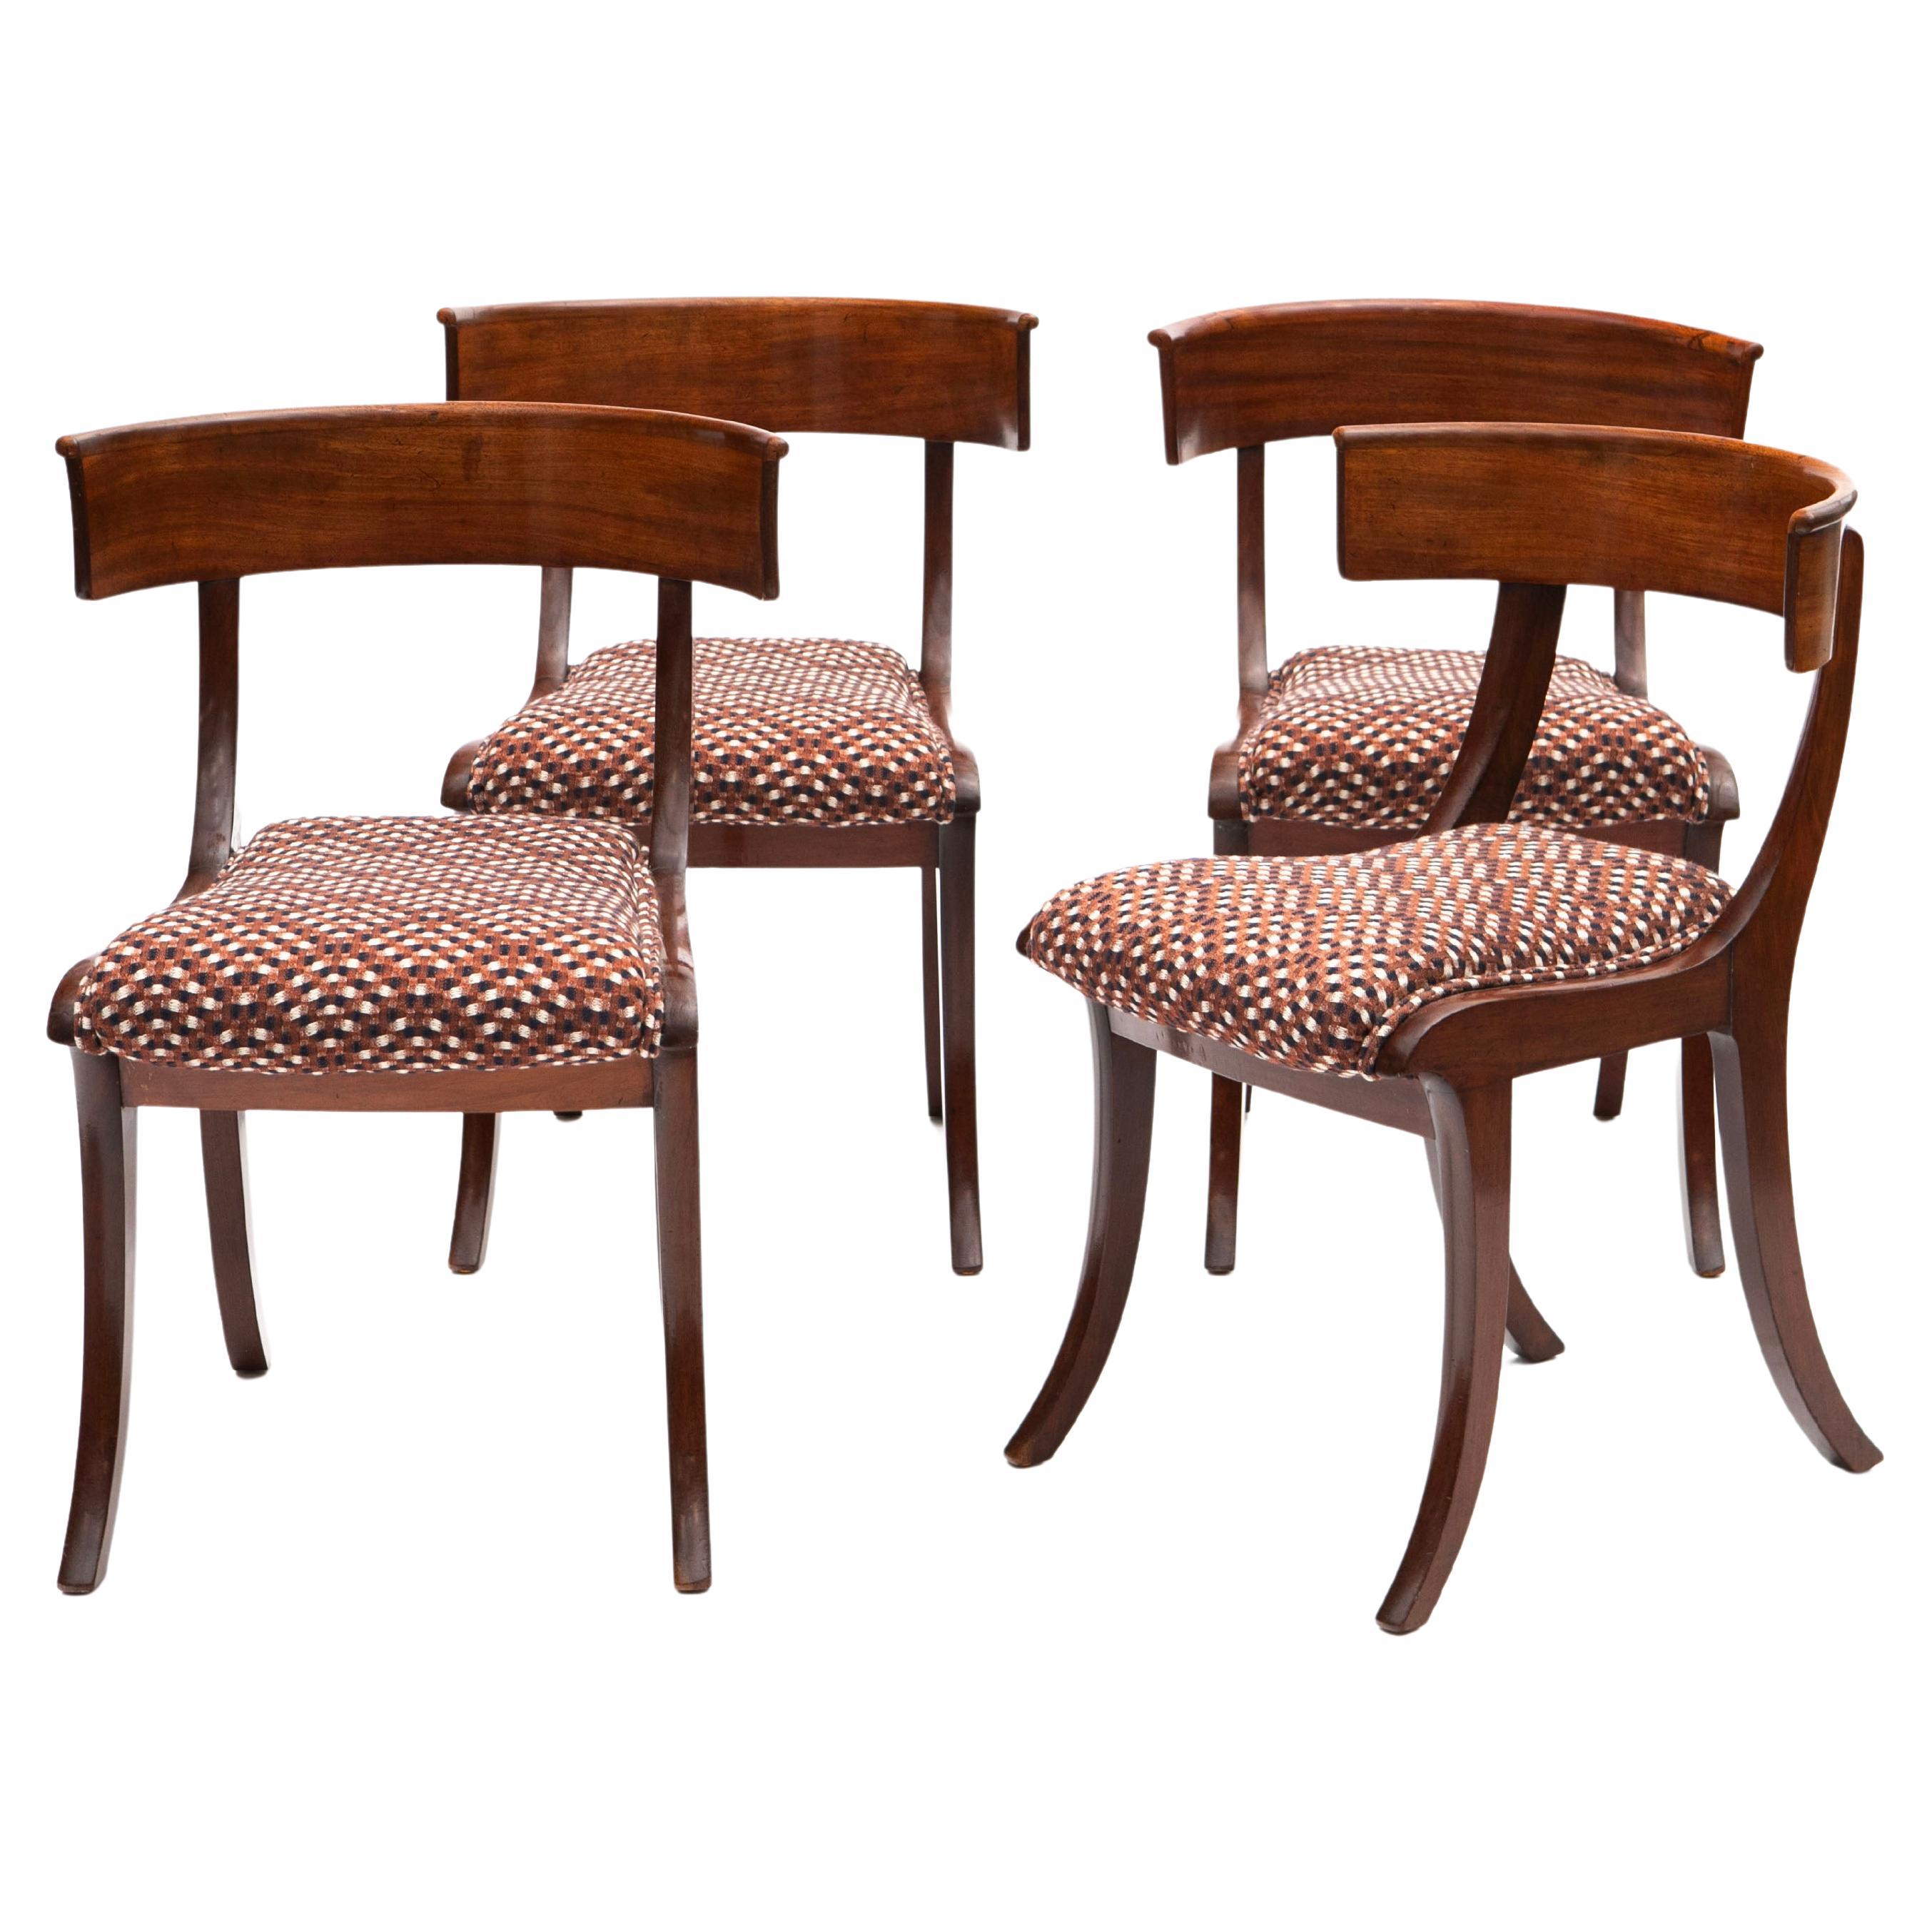 Set of Four Late Empire Klismos mahogany And Beech Chairs.